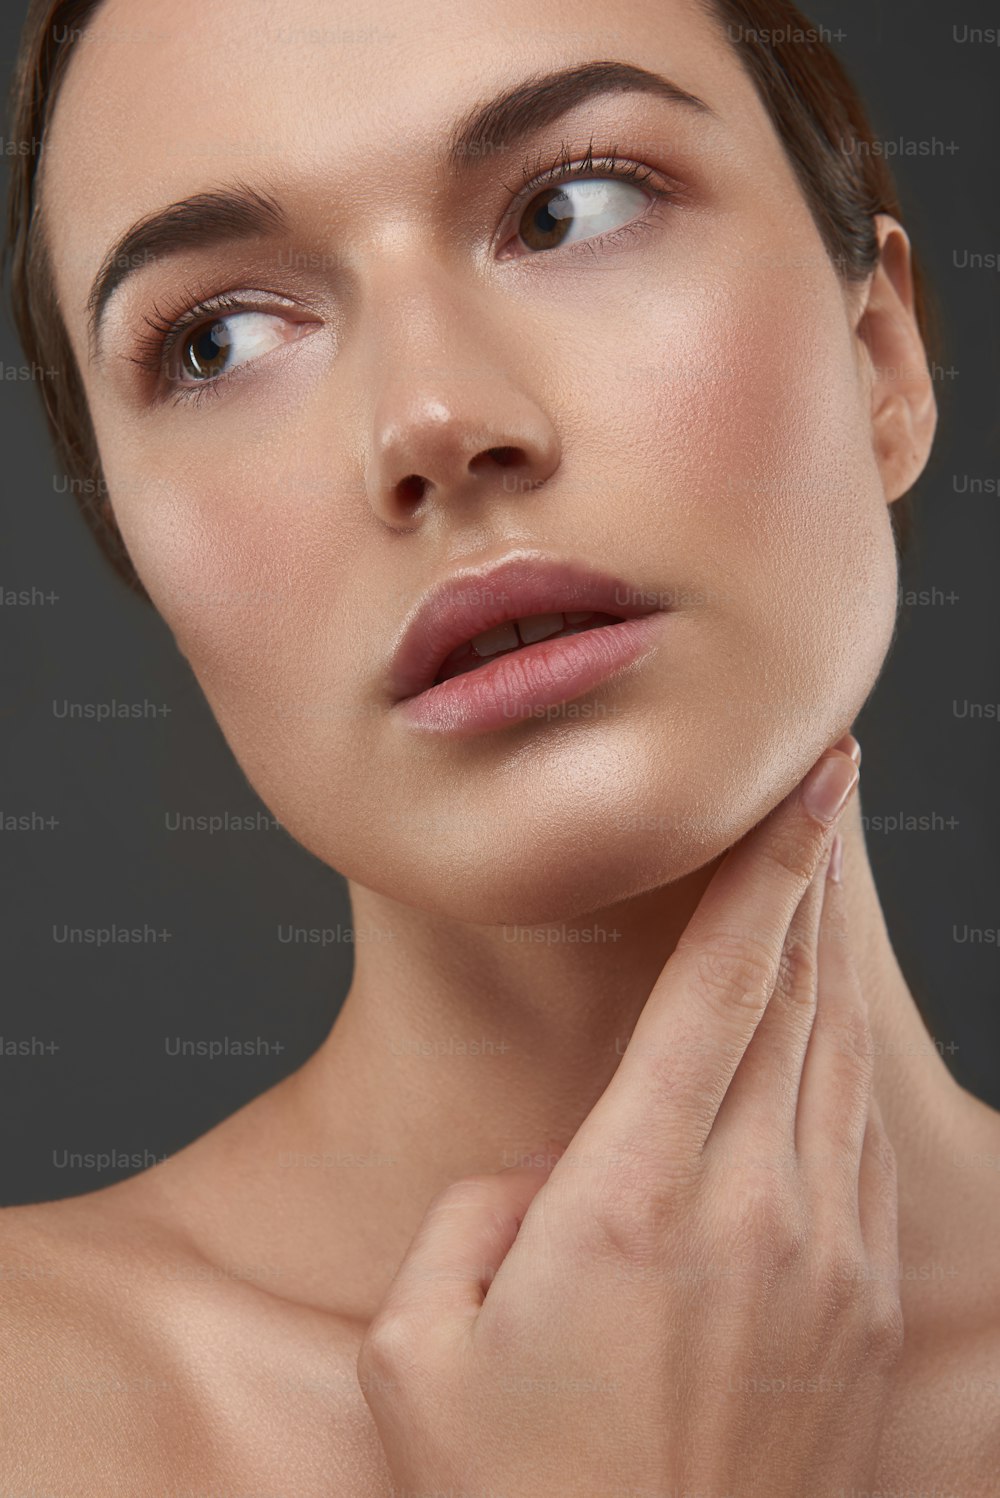 Close up portrait of charming lady with natural makeup looking away and keeping lips slightly parted. Isolated on gray background